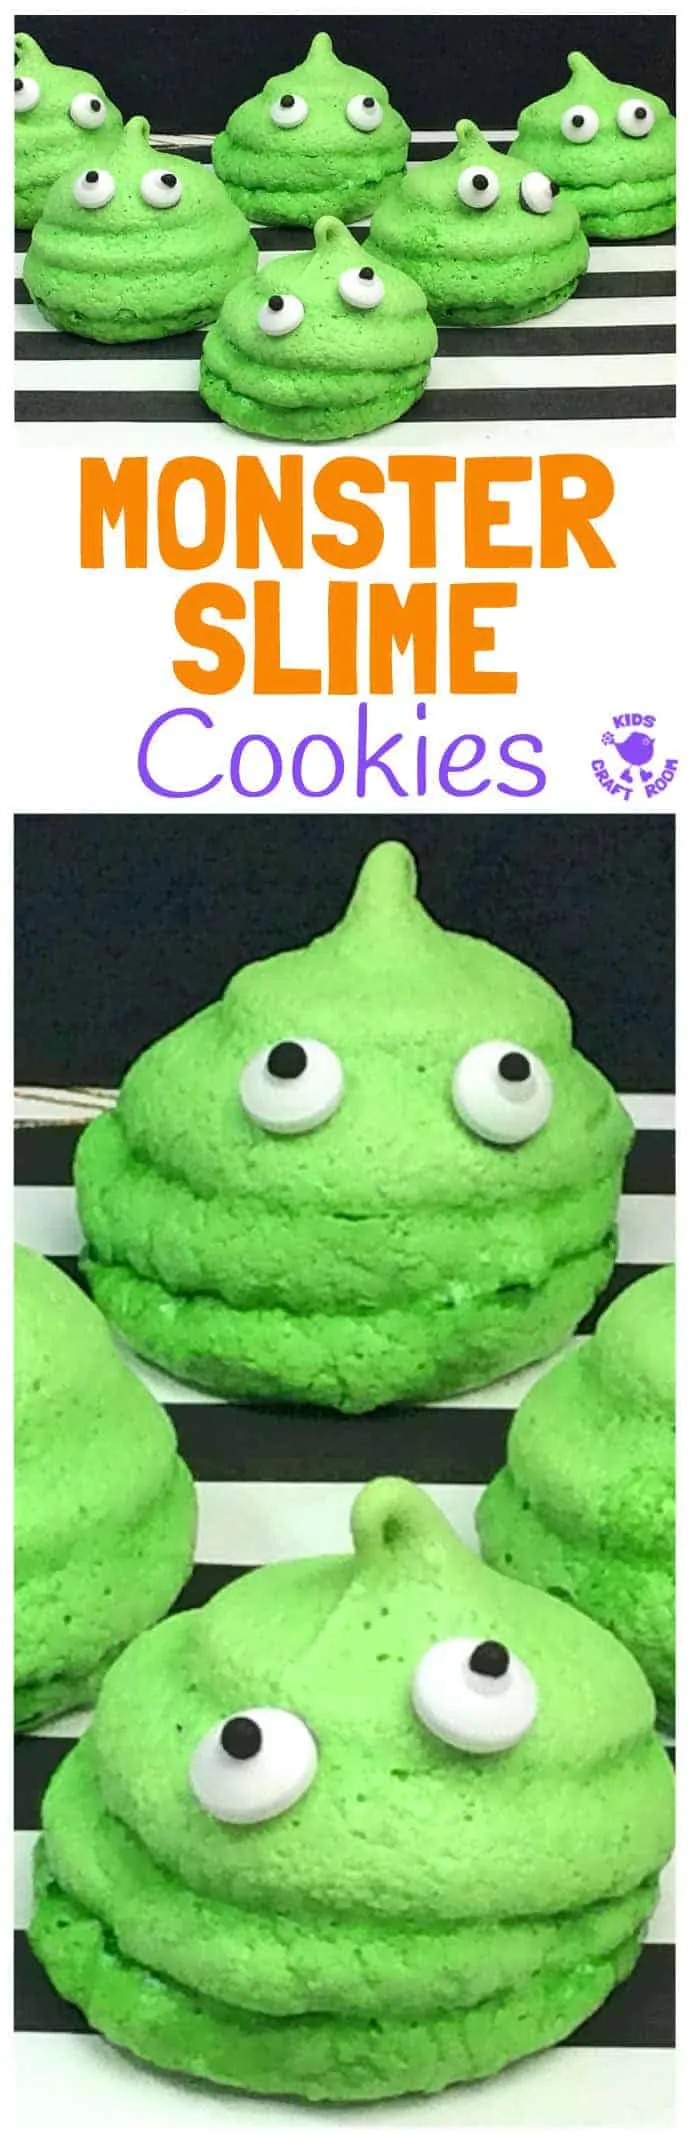 A collage of monster slime cookies from different angles.